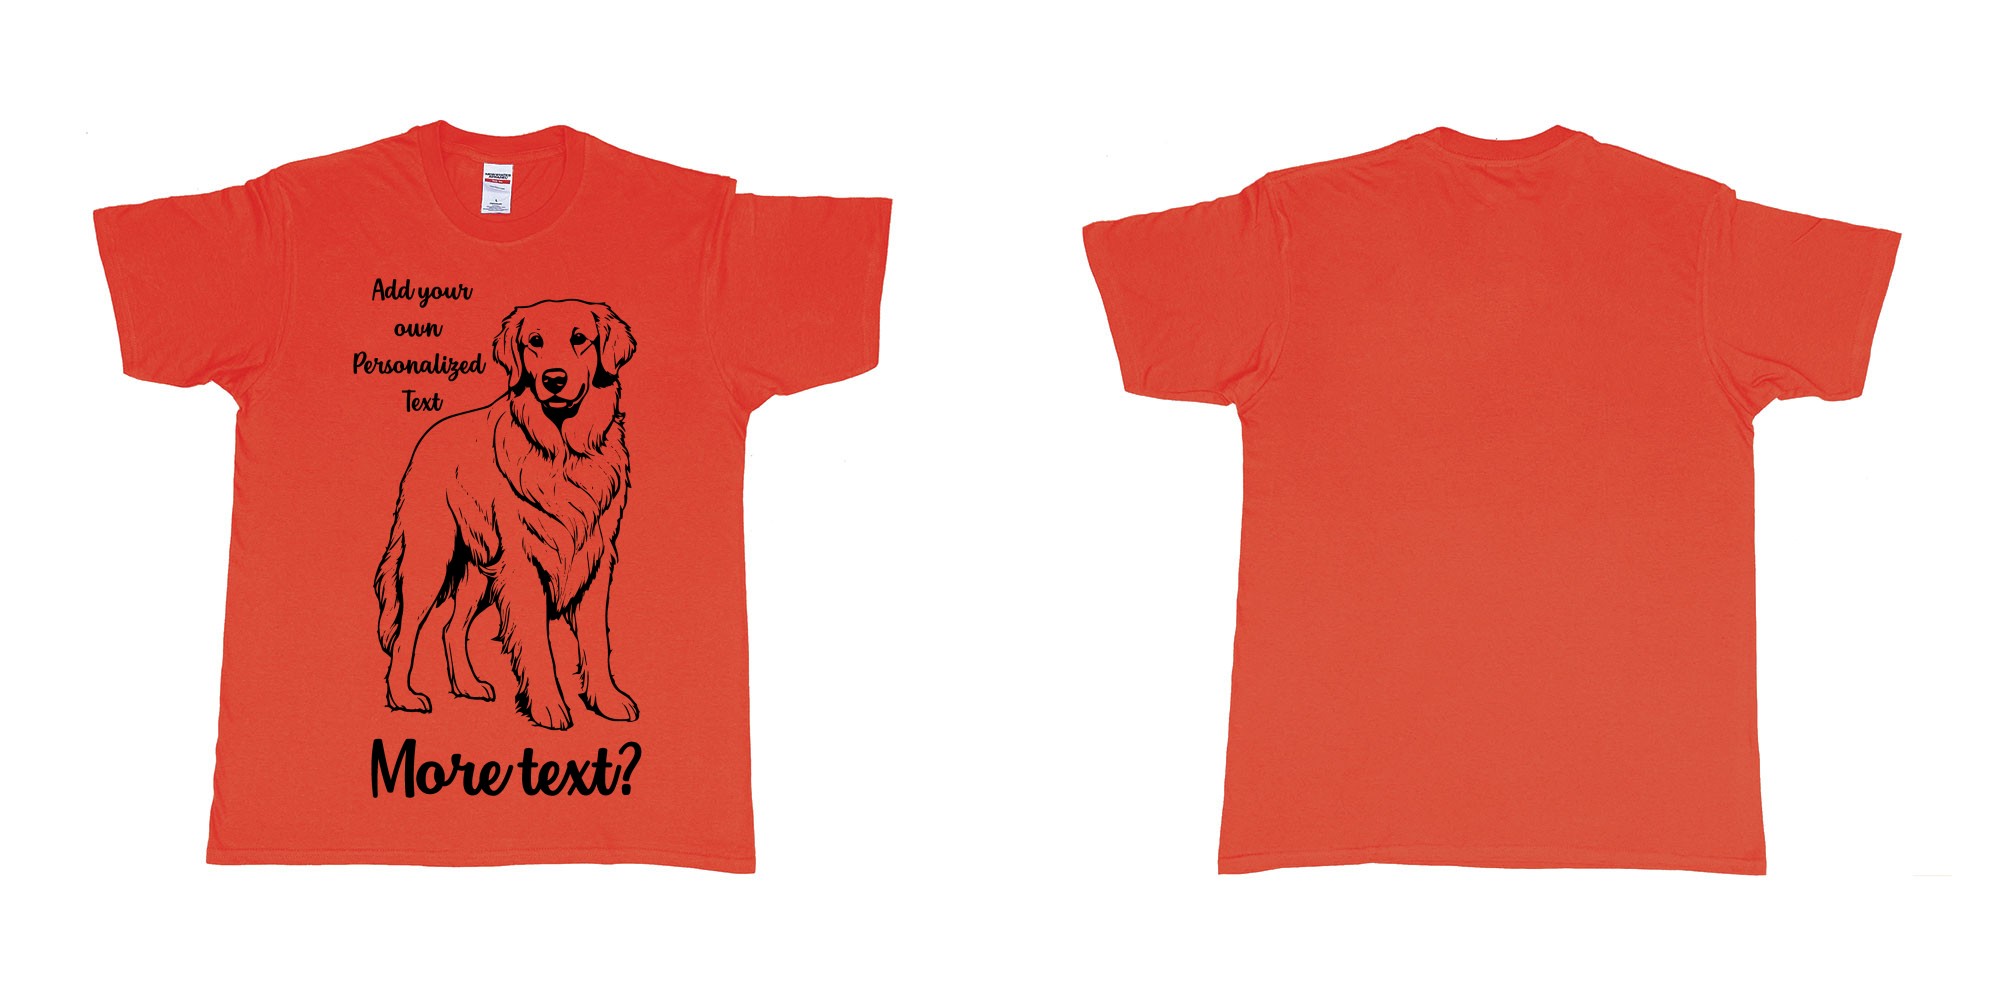 Custom tshirt design golden retriever dog breed personalized text in fabric color red choice your own text made in Bali by The Pirate Way